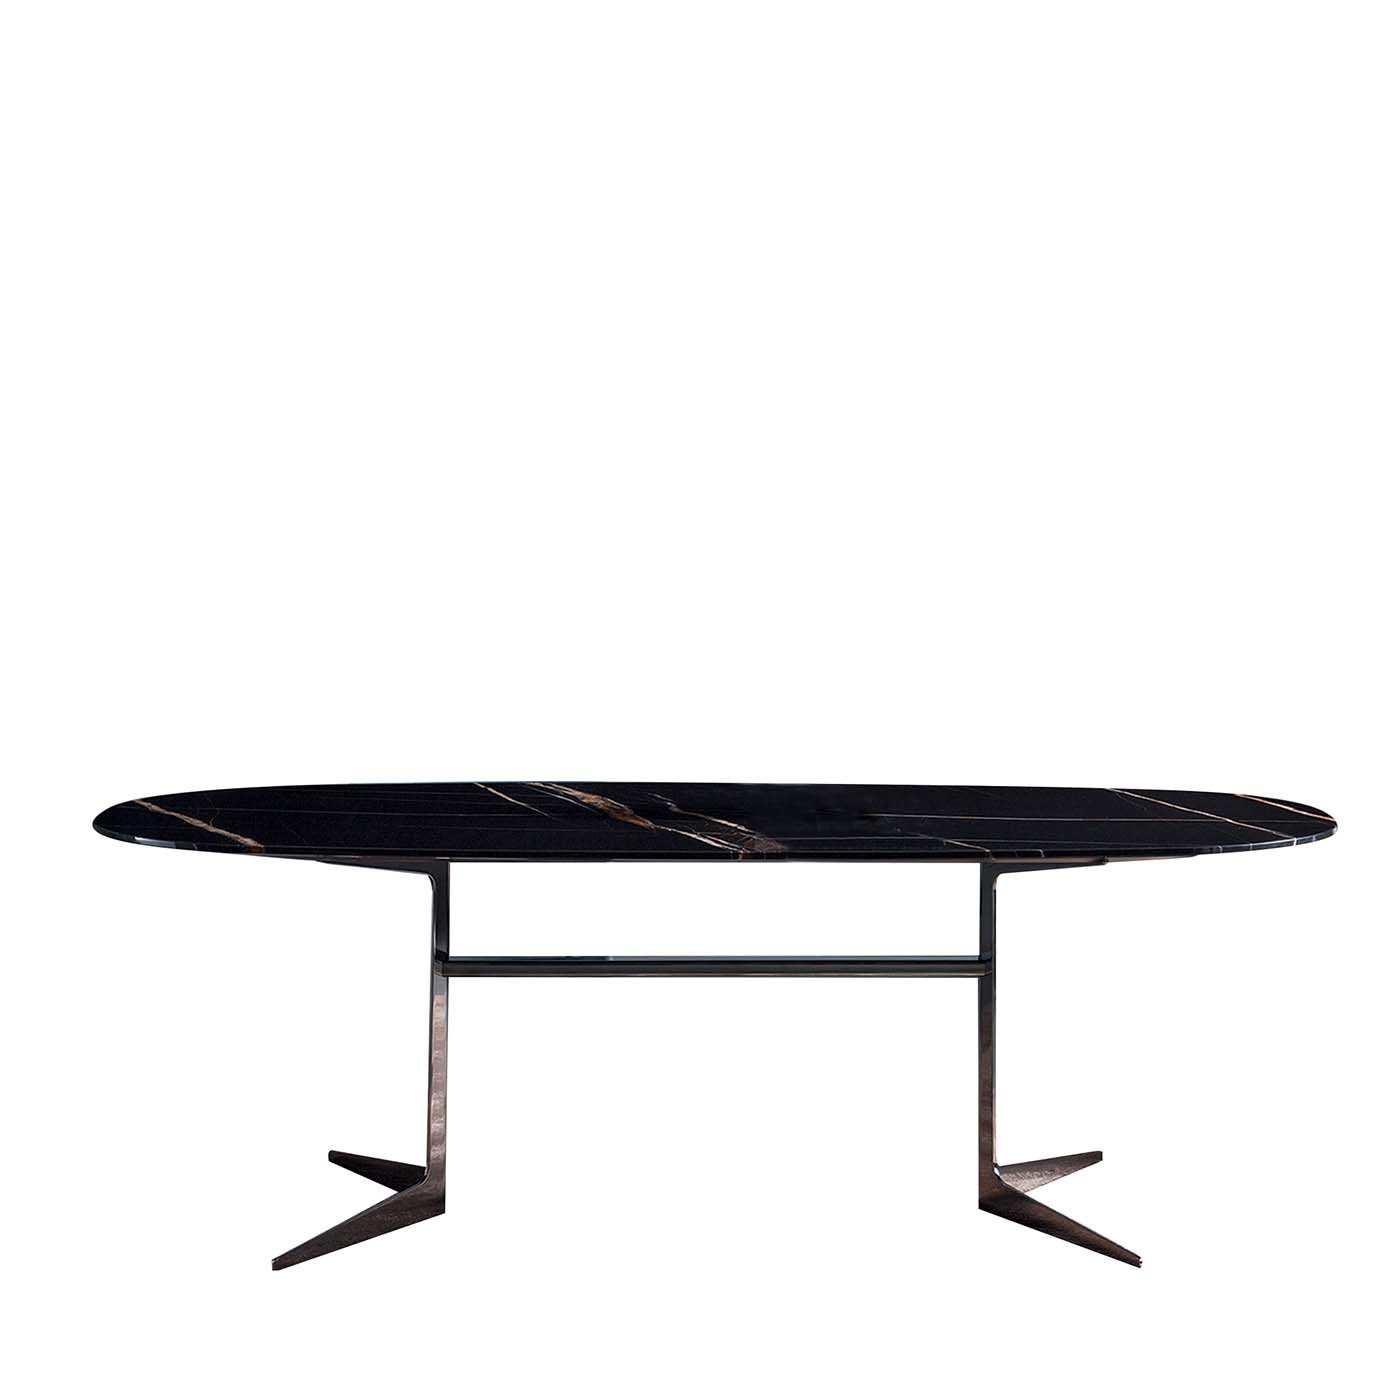 Blake Oval Dining Table with Sahara Noir Marble - Main view